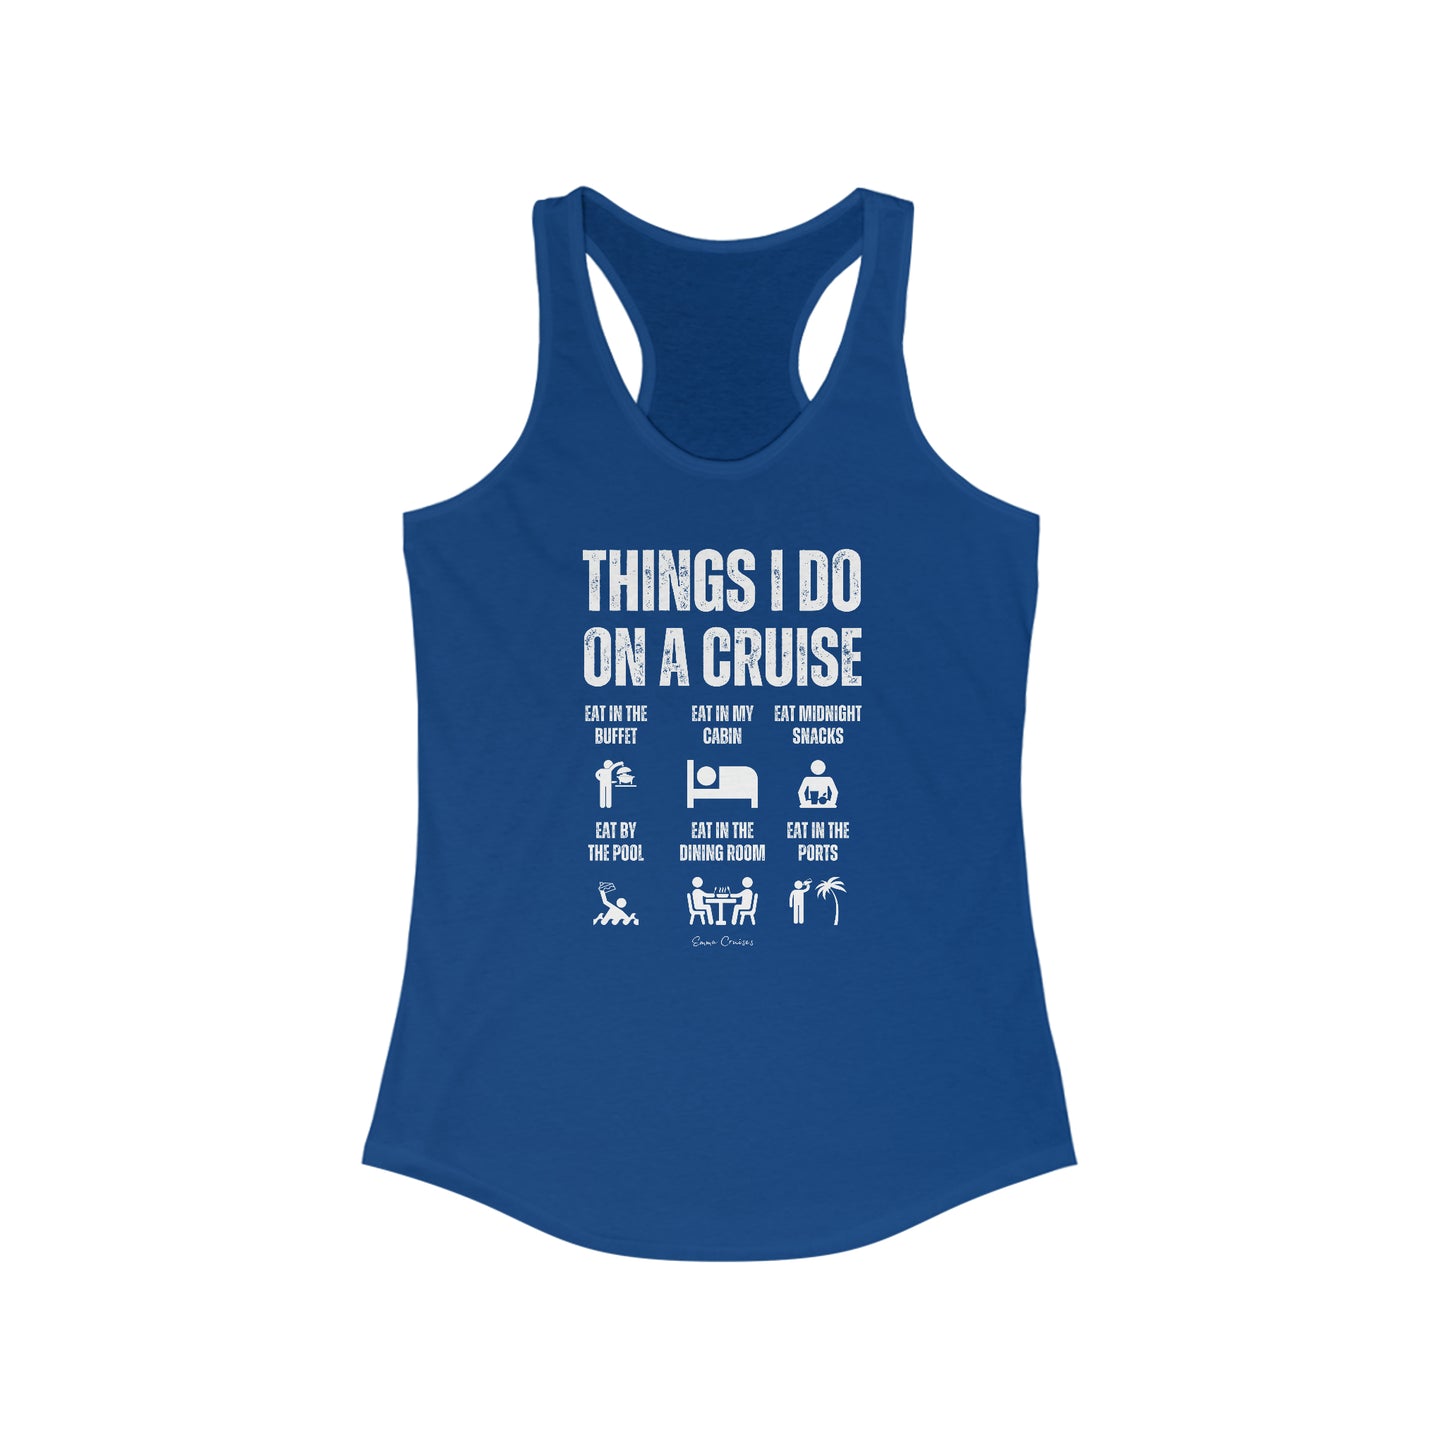 Things I Do on a Cruise - Tank Top